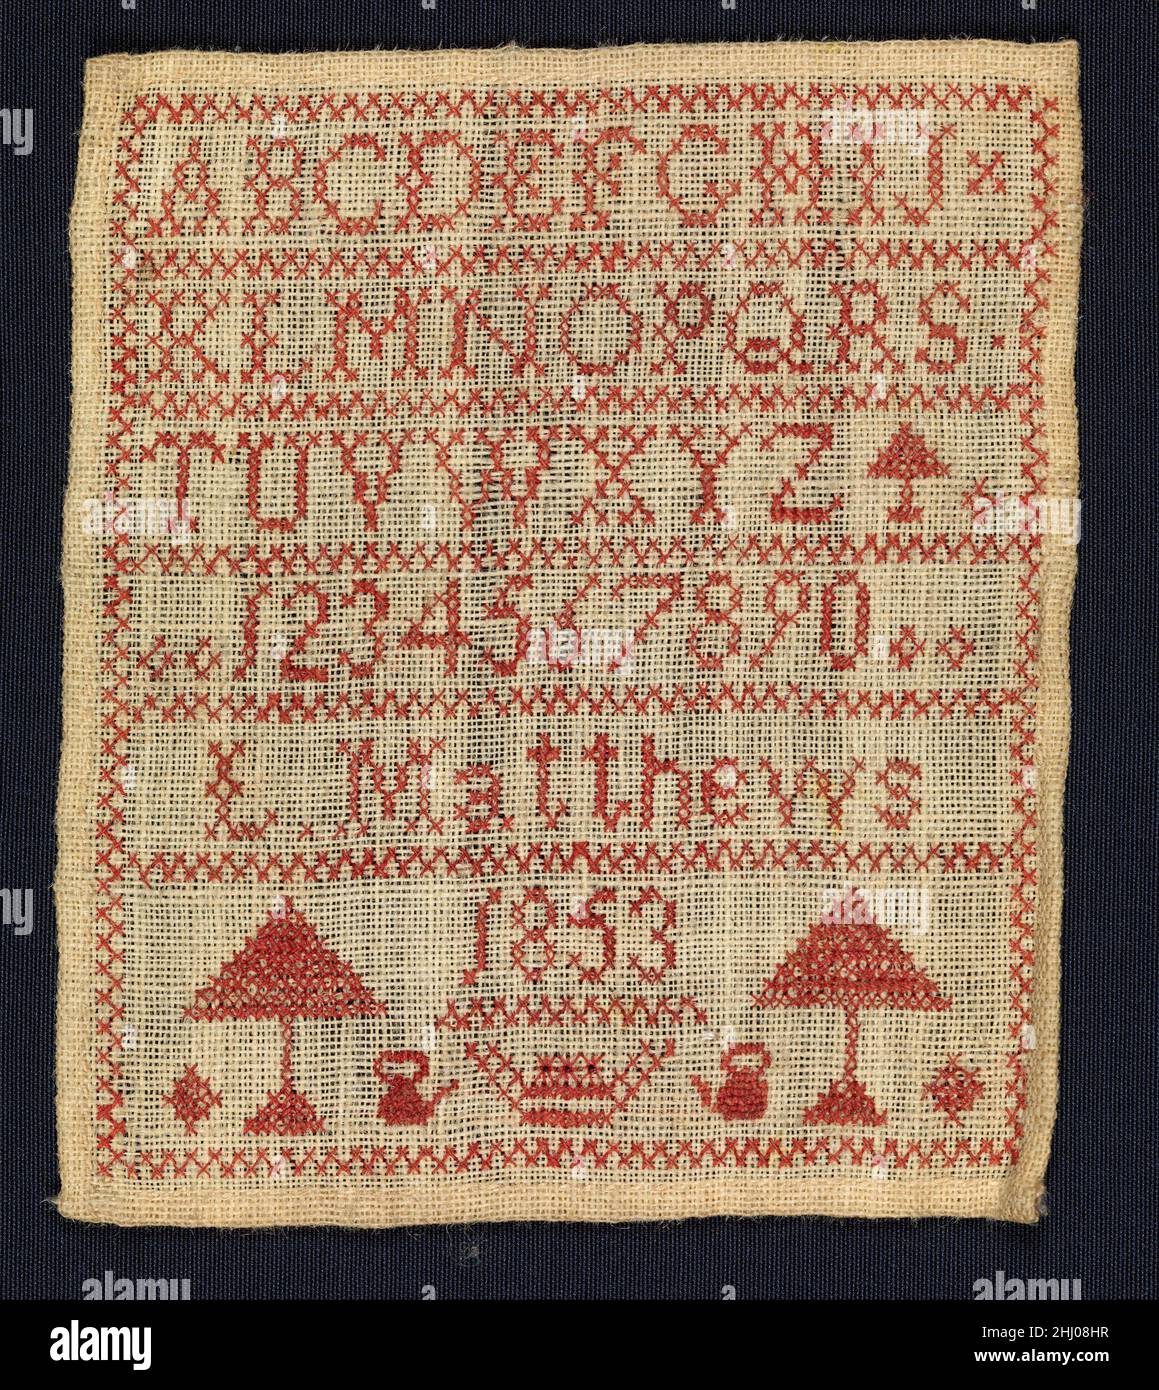 Sampler made at a charity school 1853 L. Matthews The earliest British charity schools for poor and orphaned children were founded around the country by local gentry to support and educate children whose families lived in the vicinity. In the eighteenth century, the number of institutions increased significantly. Arguably the most famous of these is the Foundling Hospital in London established by Thomas Coram in 1741; the charity still exists today as the Thomas Coram Foundation for Children. This sampler was probably made to be included in a book of stitching exercises.. Sampler made at a cha Stock Photo